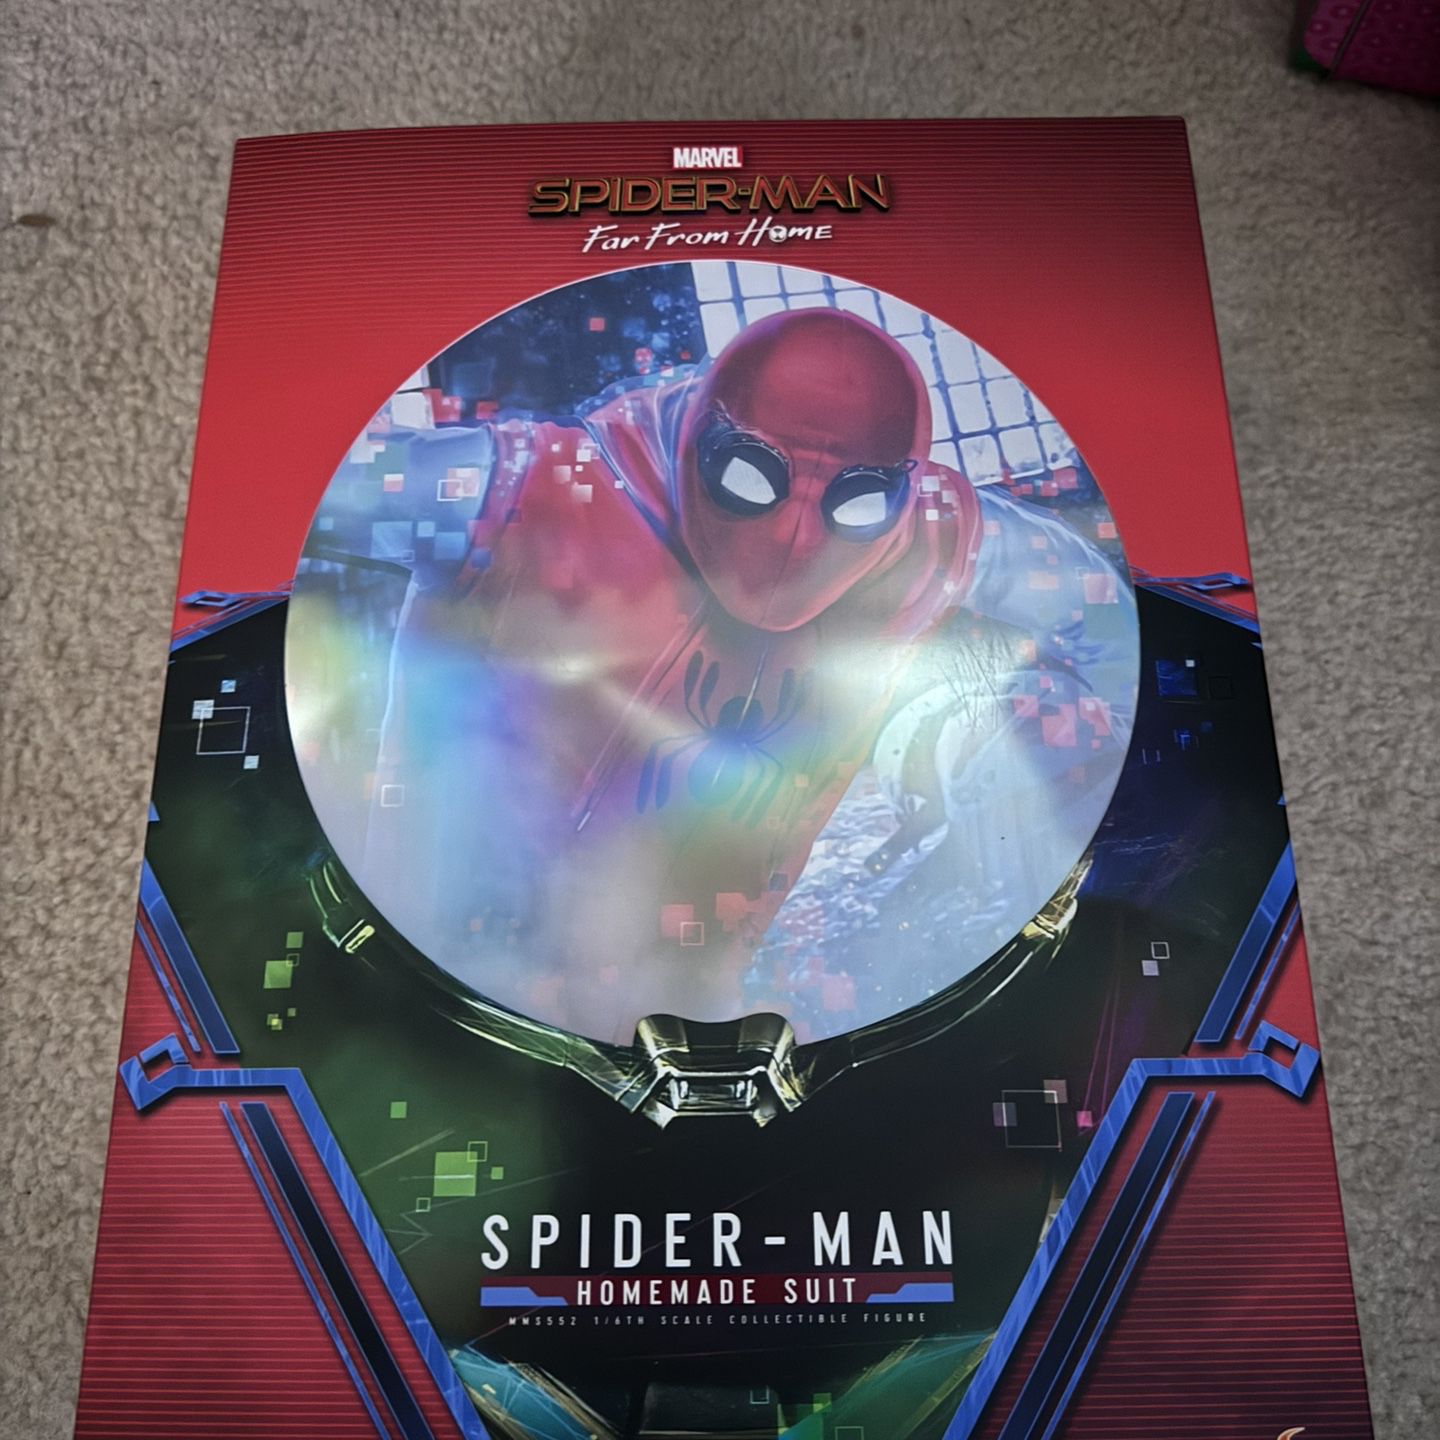 Spiderman Far From Home: Homemade suit figure 1:6th scale